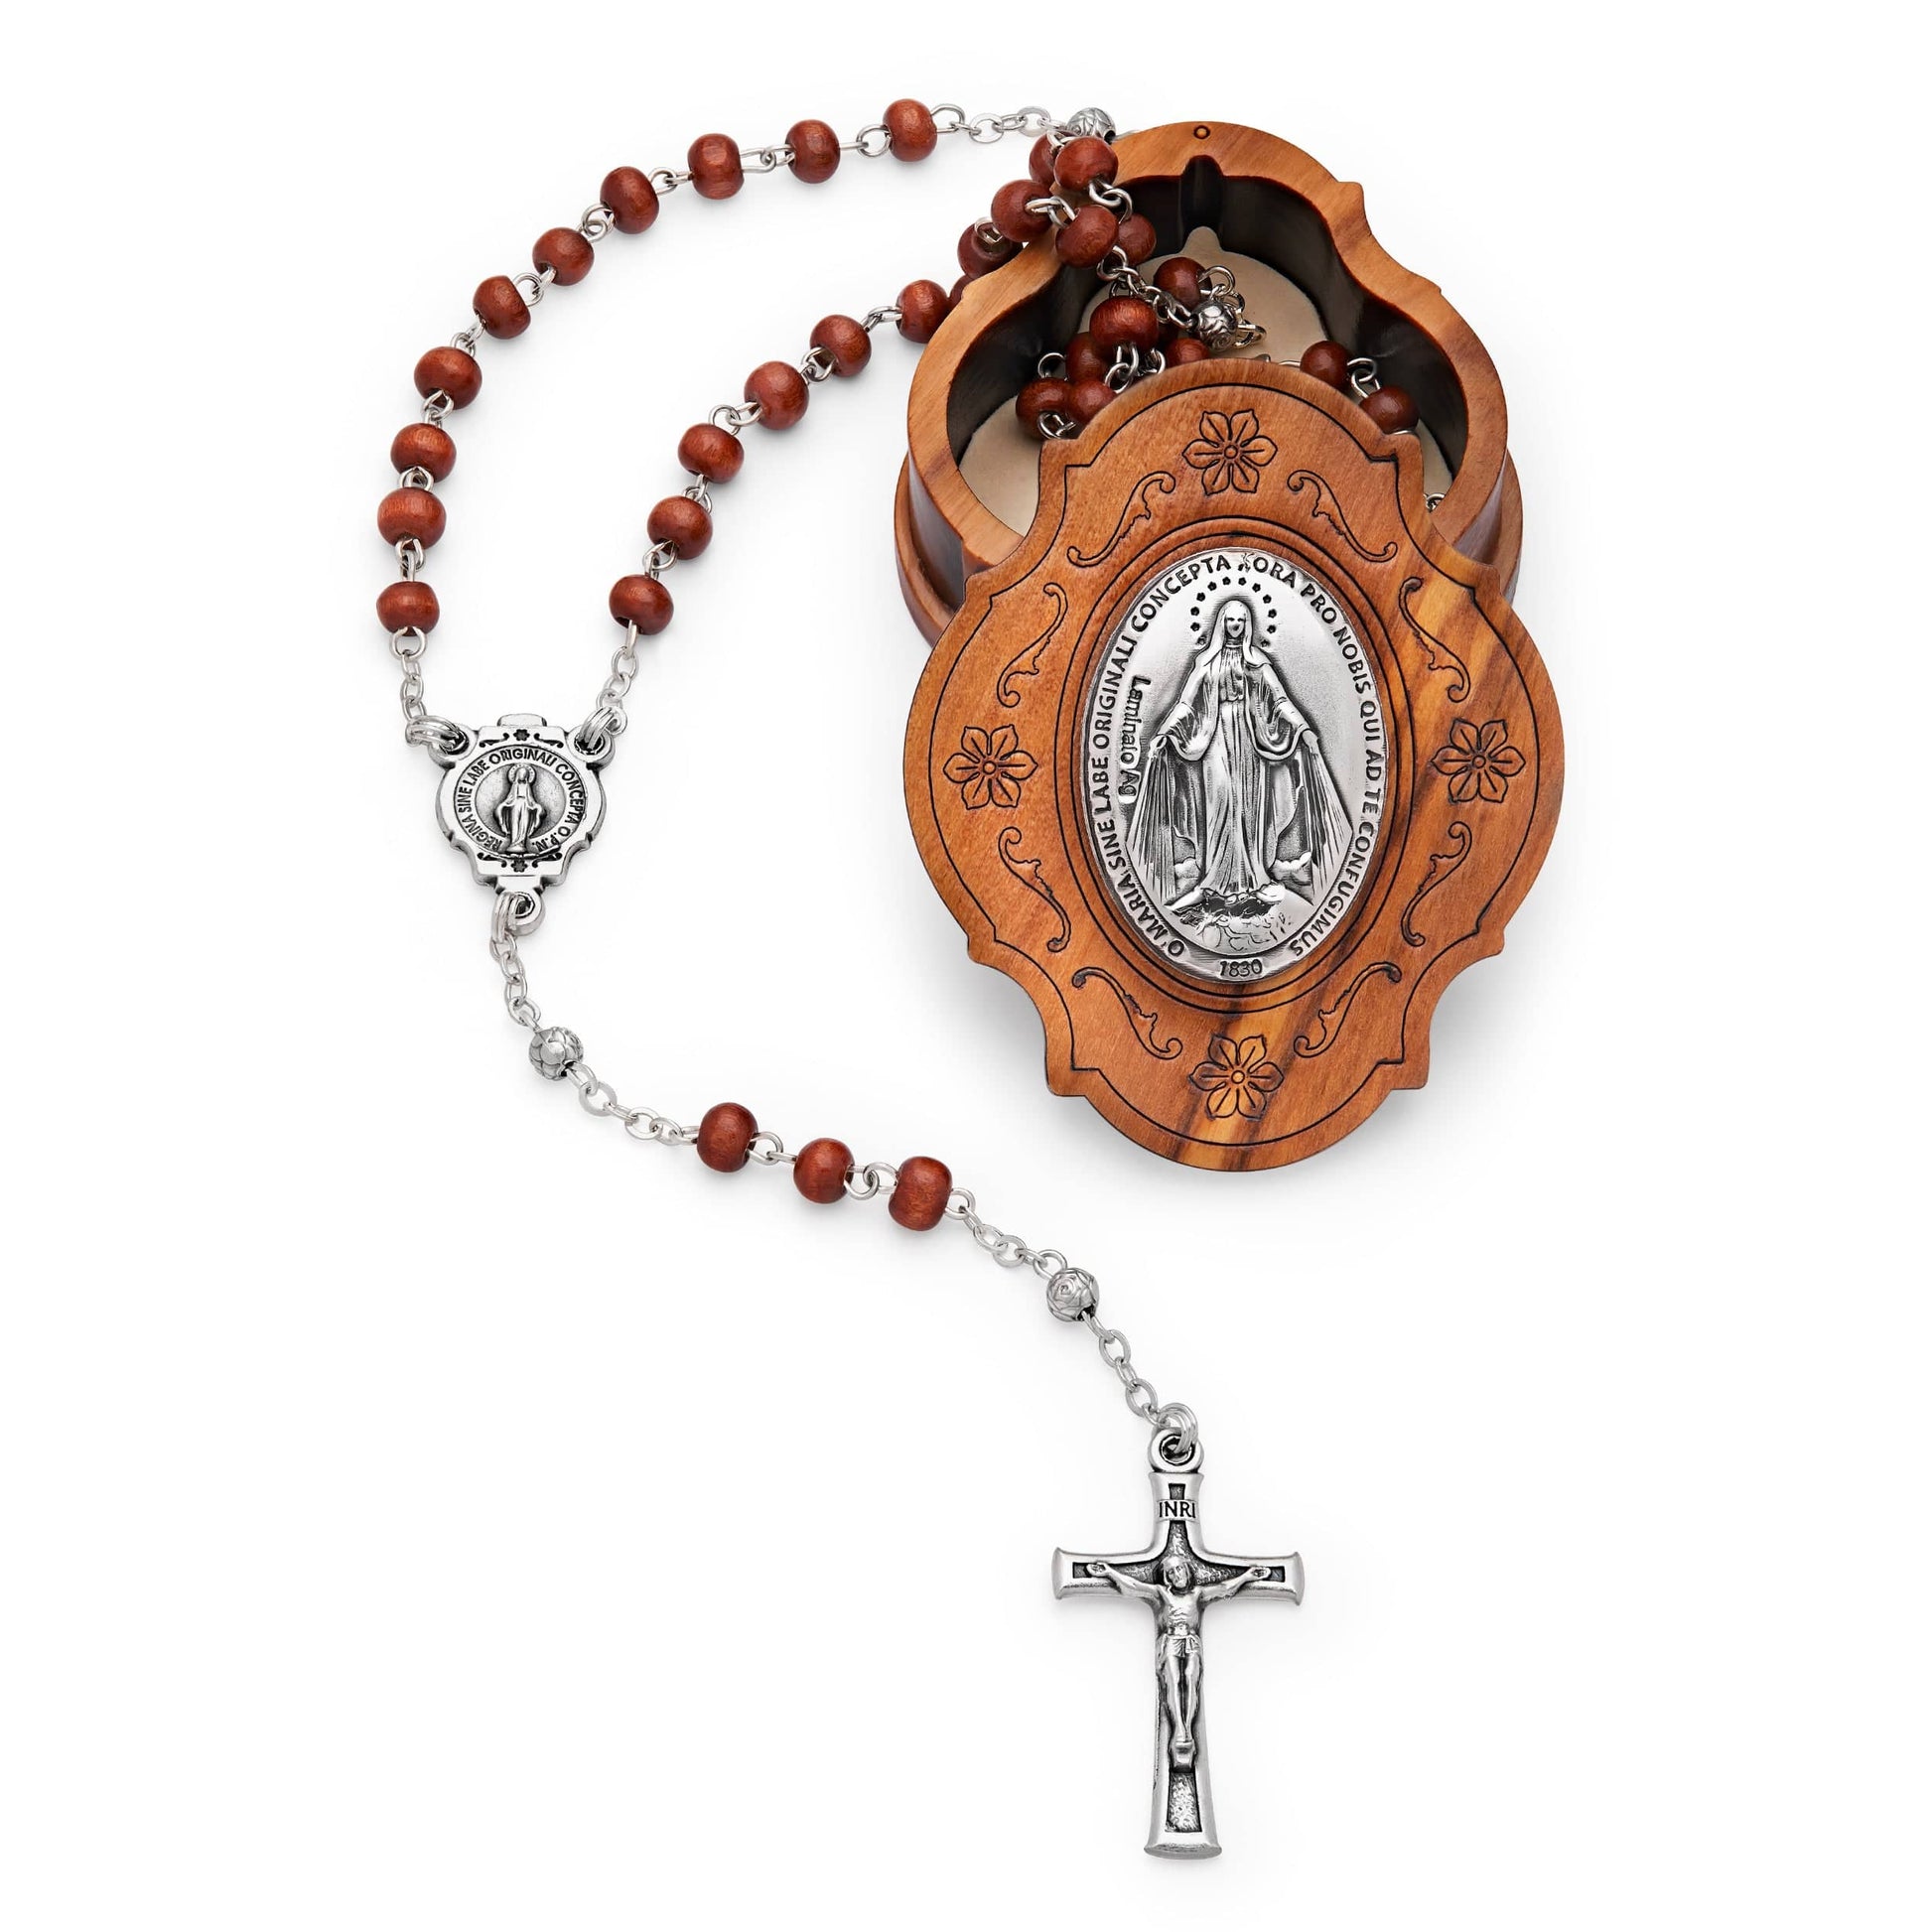 MONDO CATTOLICO Prayer Beads 38 cm (14.96 in) / 4 mm (0.15 in) Miraculous Virgin Box and Rosary in Wooden